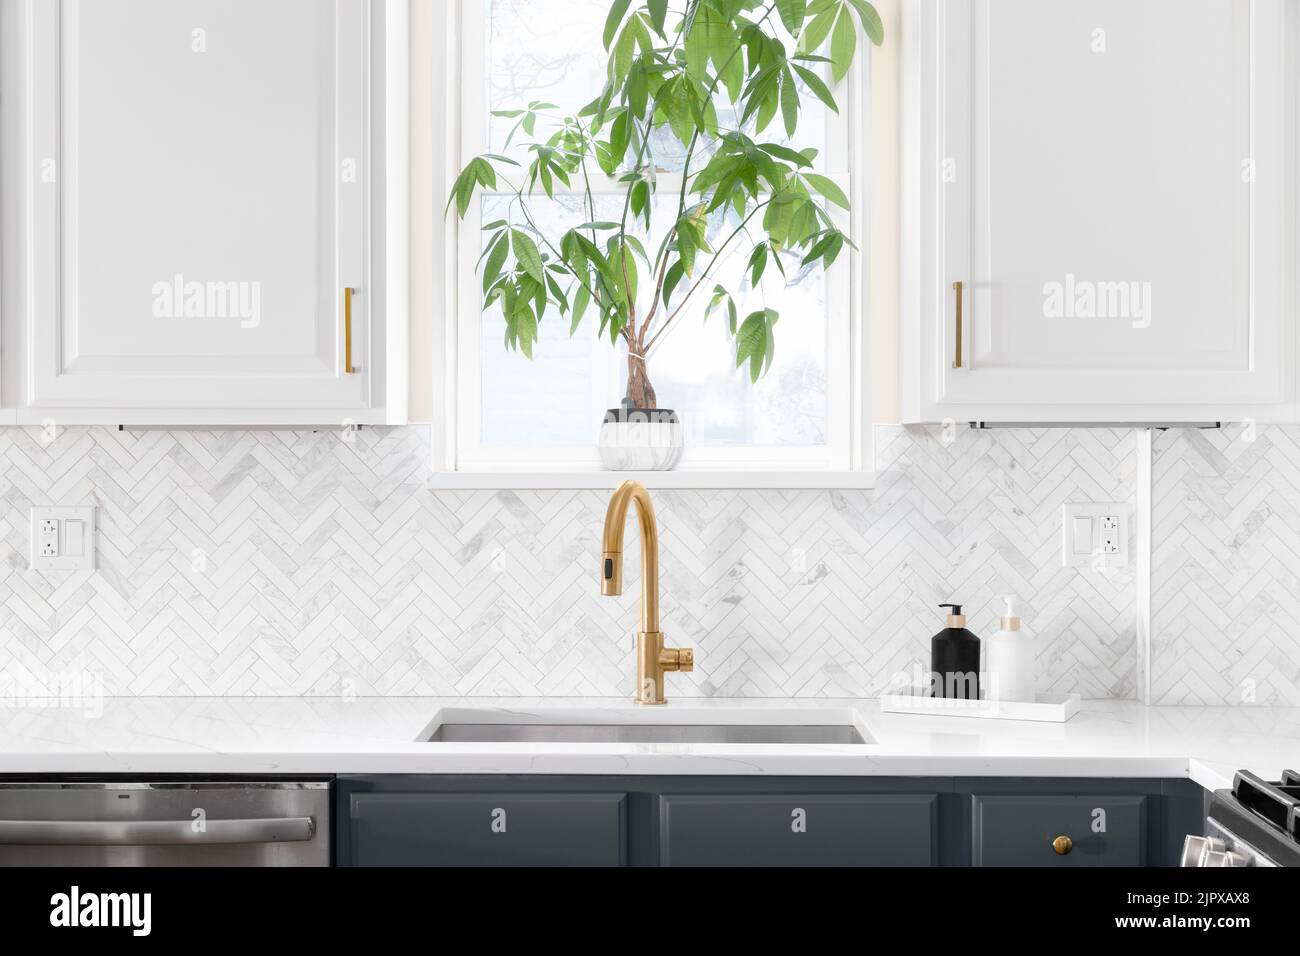 Sink detail shot in a luxury kitchen with herringbone backsplash tiles. white marble countertop, and gold faucet. Stock Photo